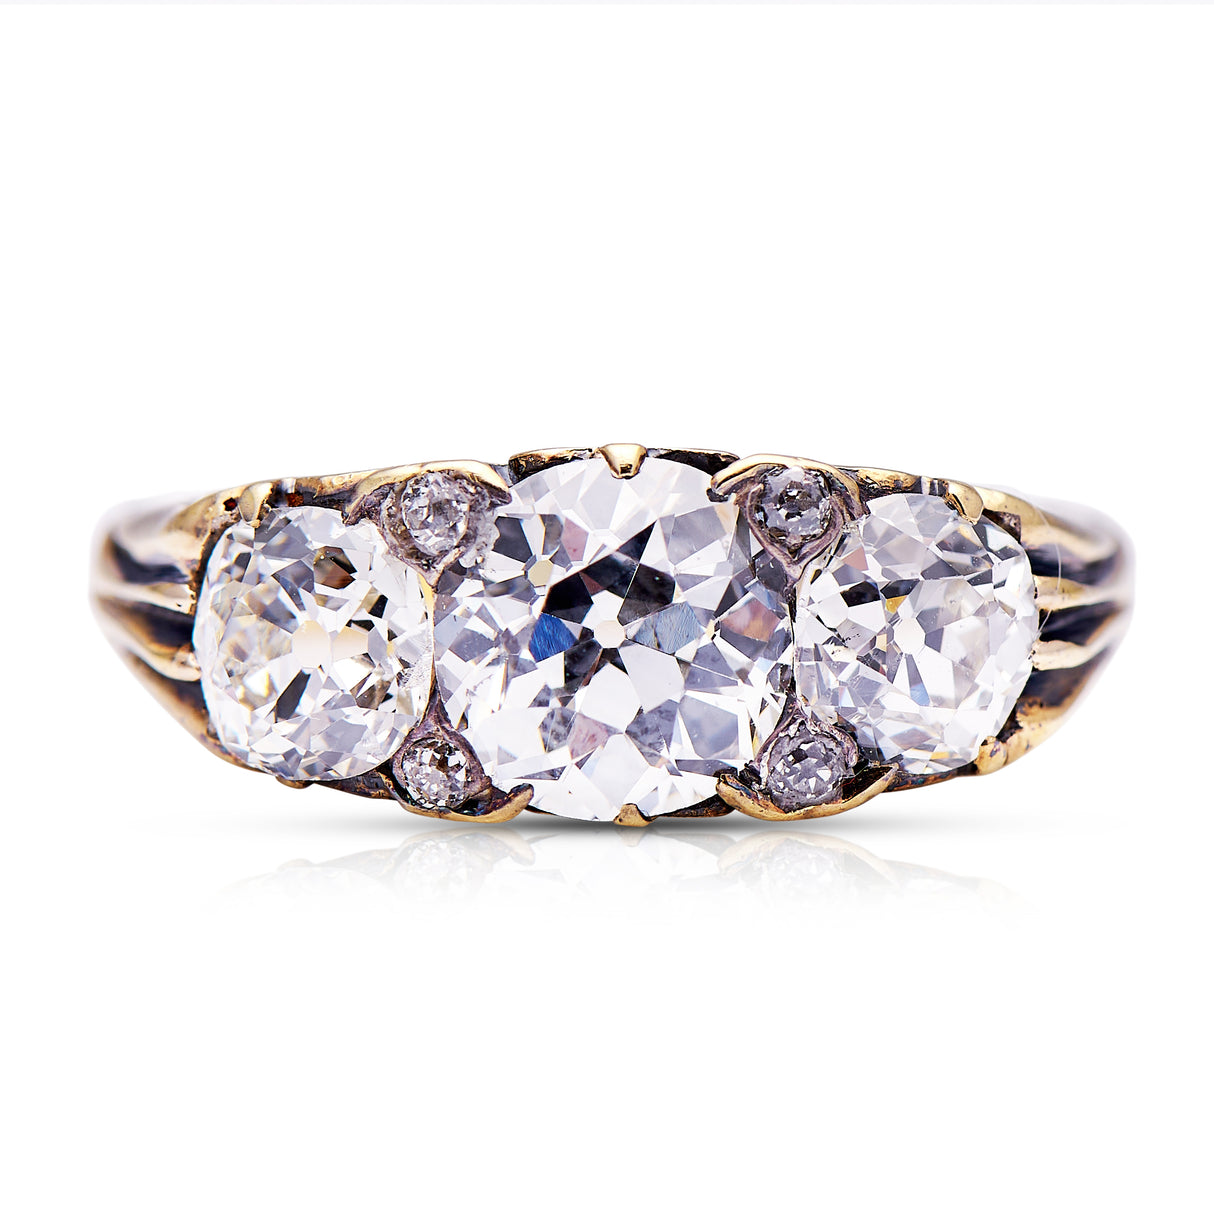 An Exceptional Victorian Diamond Three-Stone Engagement Ring, 18ct Yellow Gold